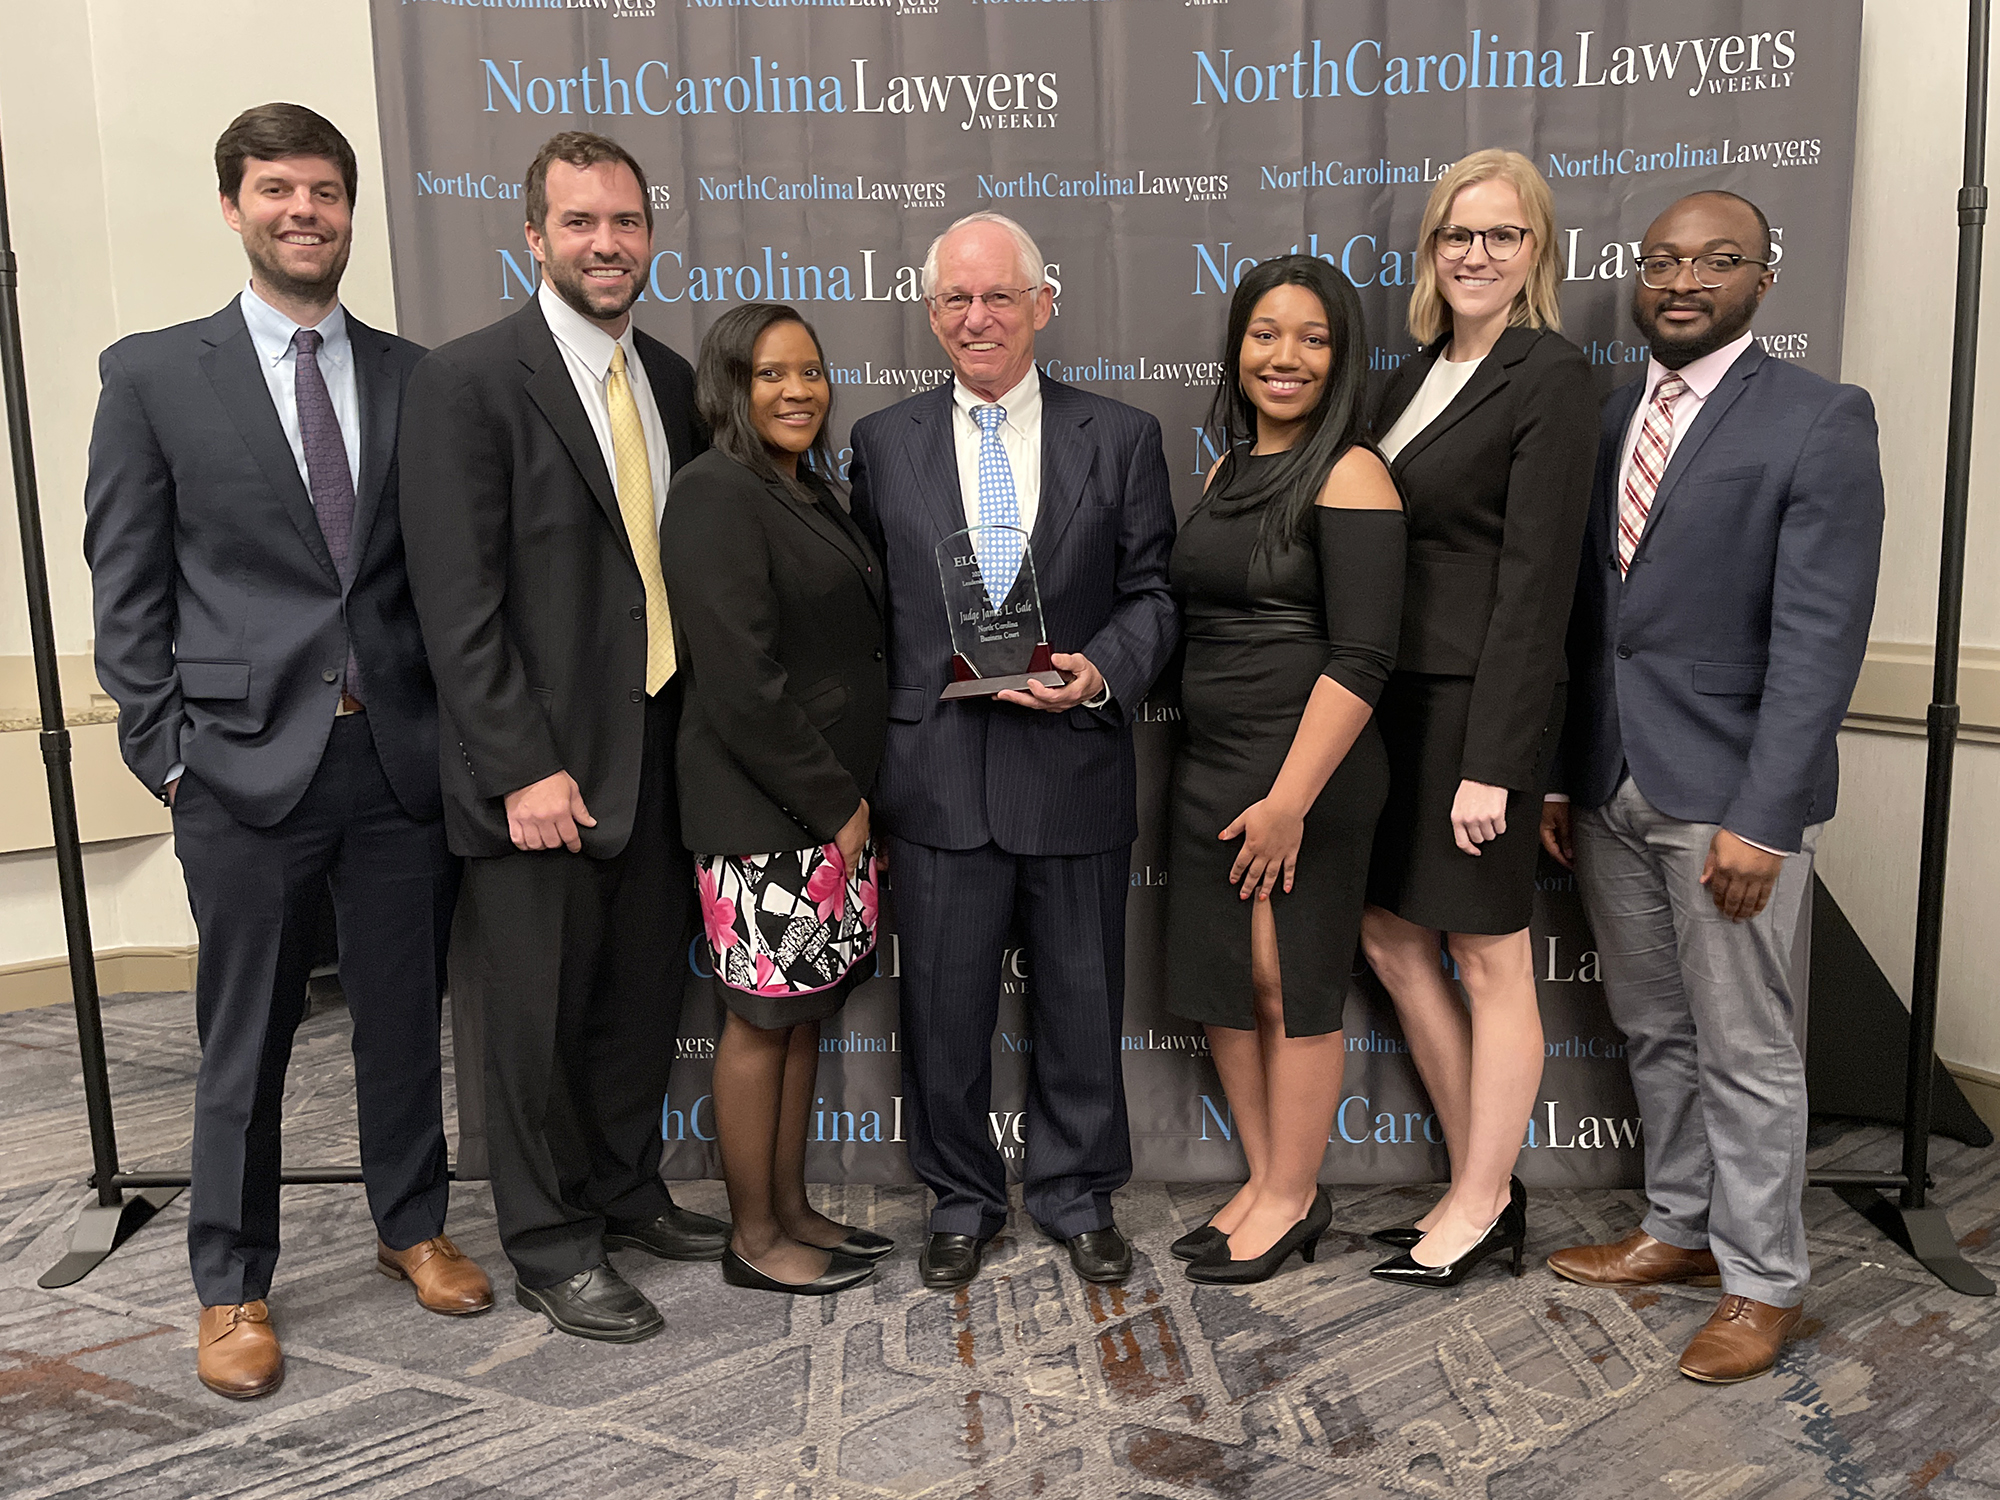 Elon College / Currently at Elon / Company Court judge honored with Elon Regulation leadership award